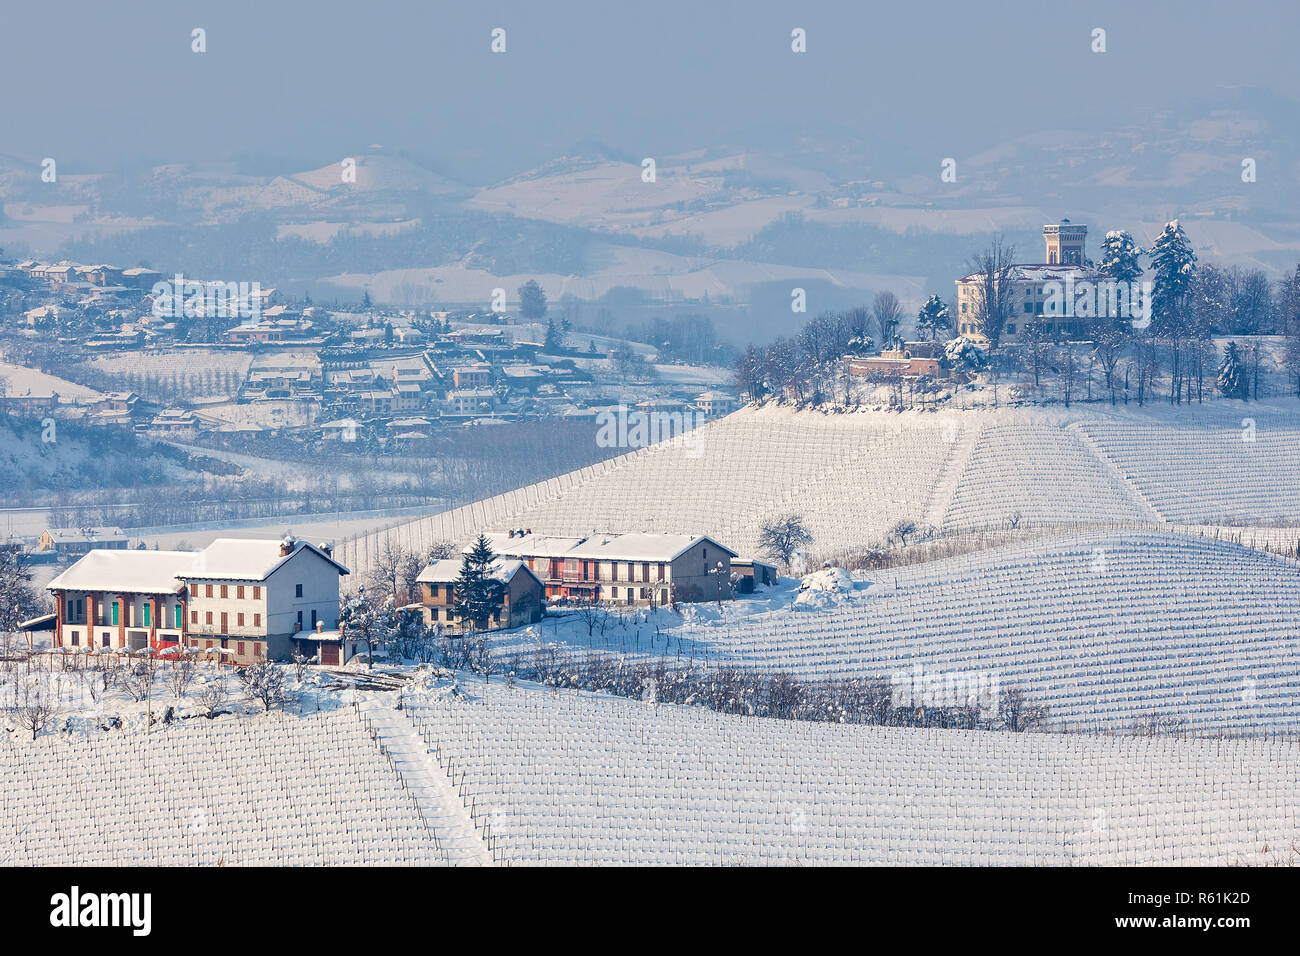 View of snowy hills and vineyards of Langhe region in Piedmont, Northern Italy. Stock Photo